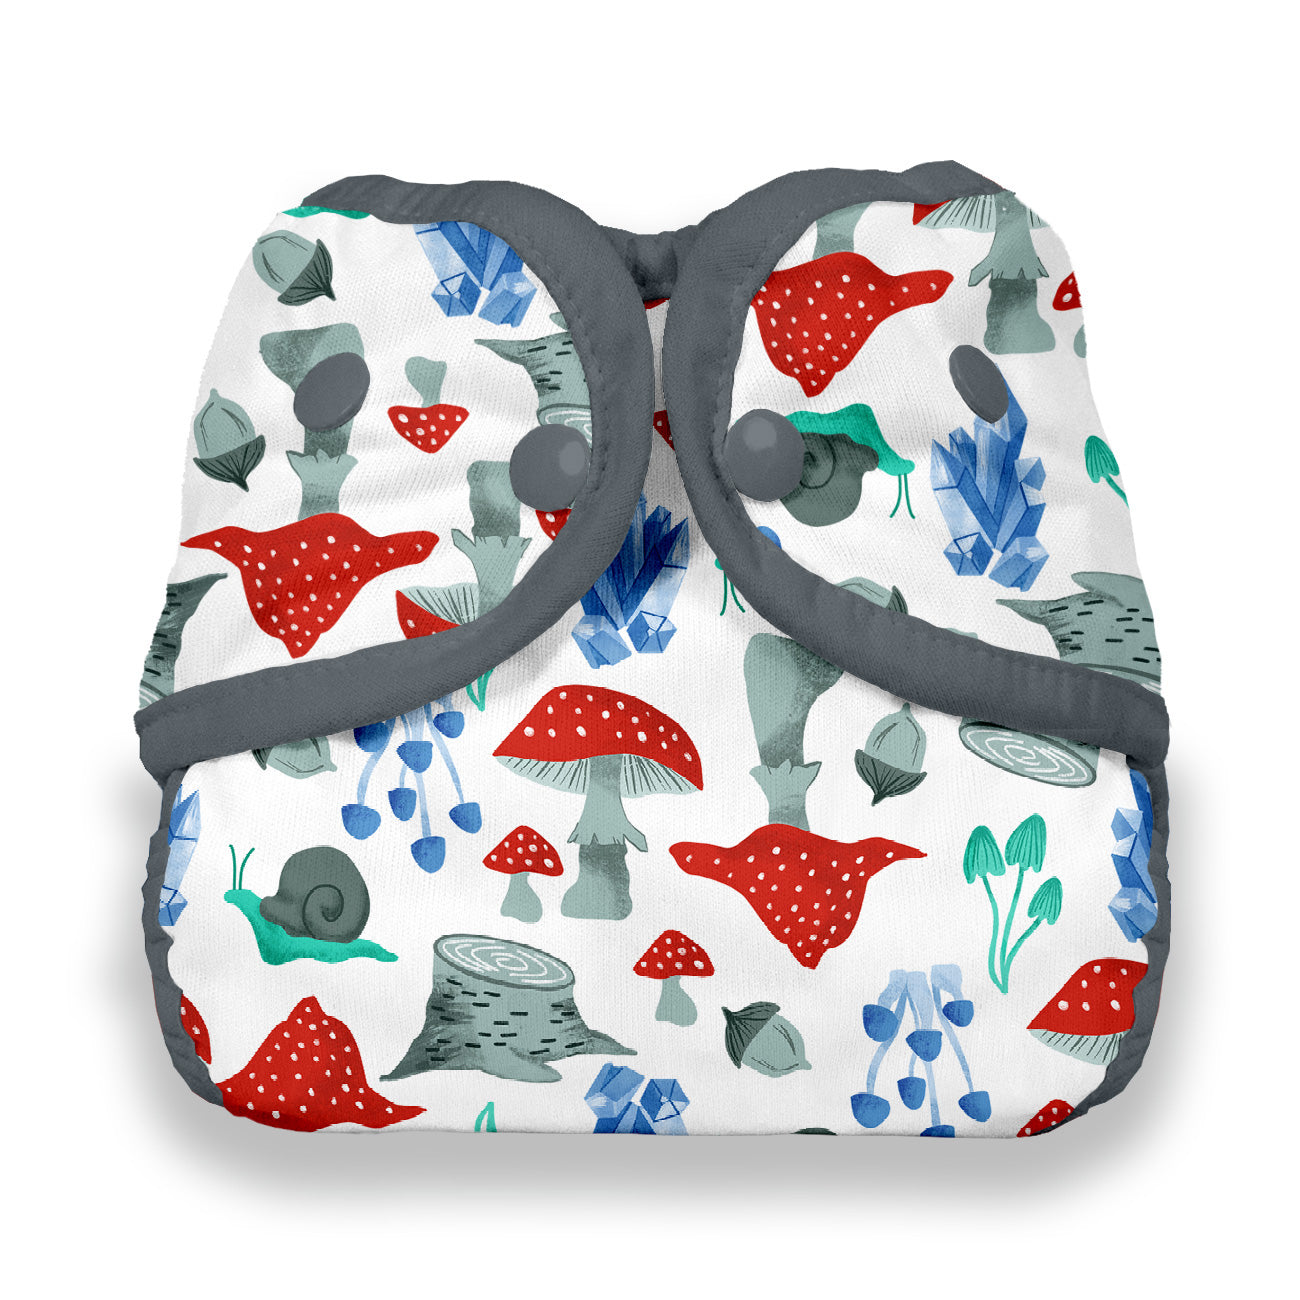 Thirsties Diaper Cover Snap Forest Frolic mushroom print